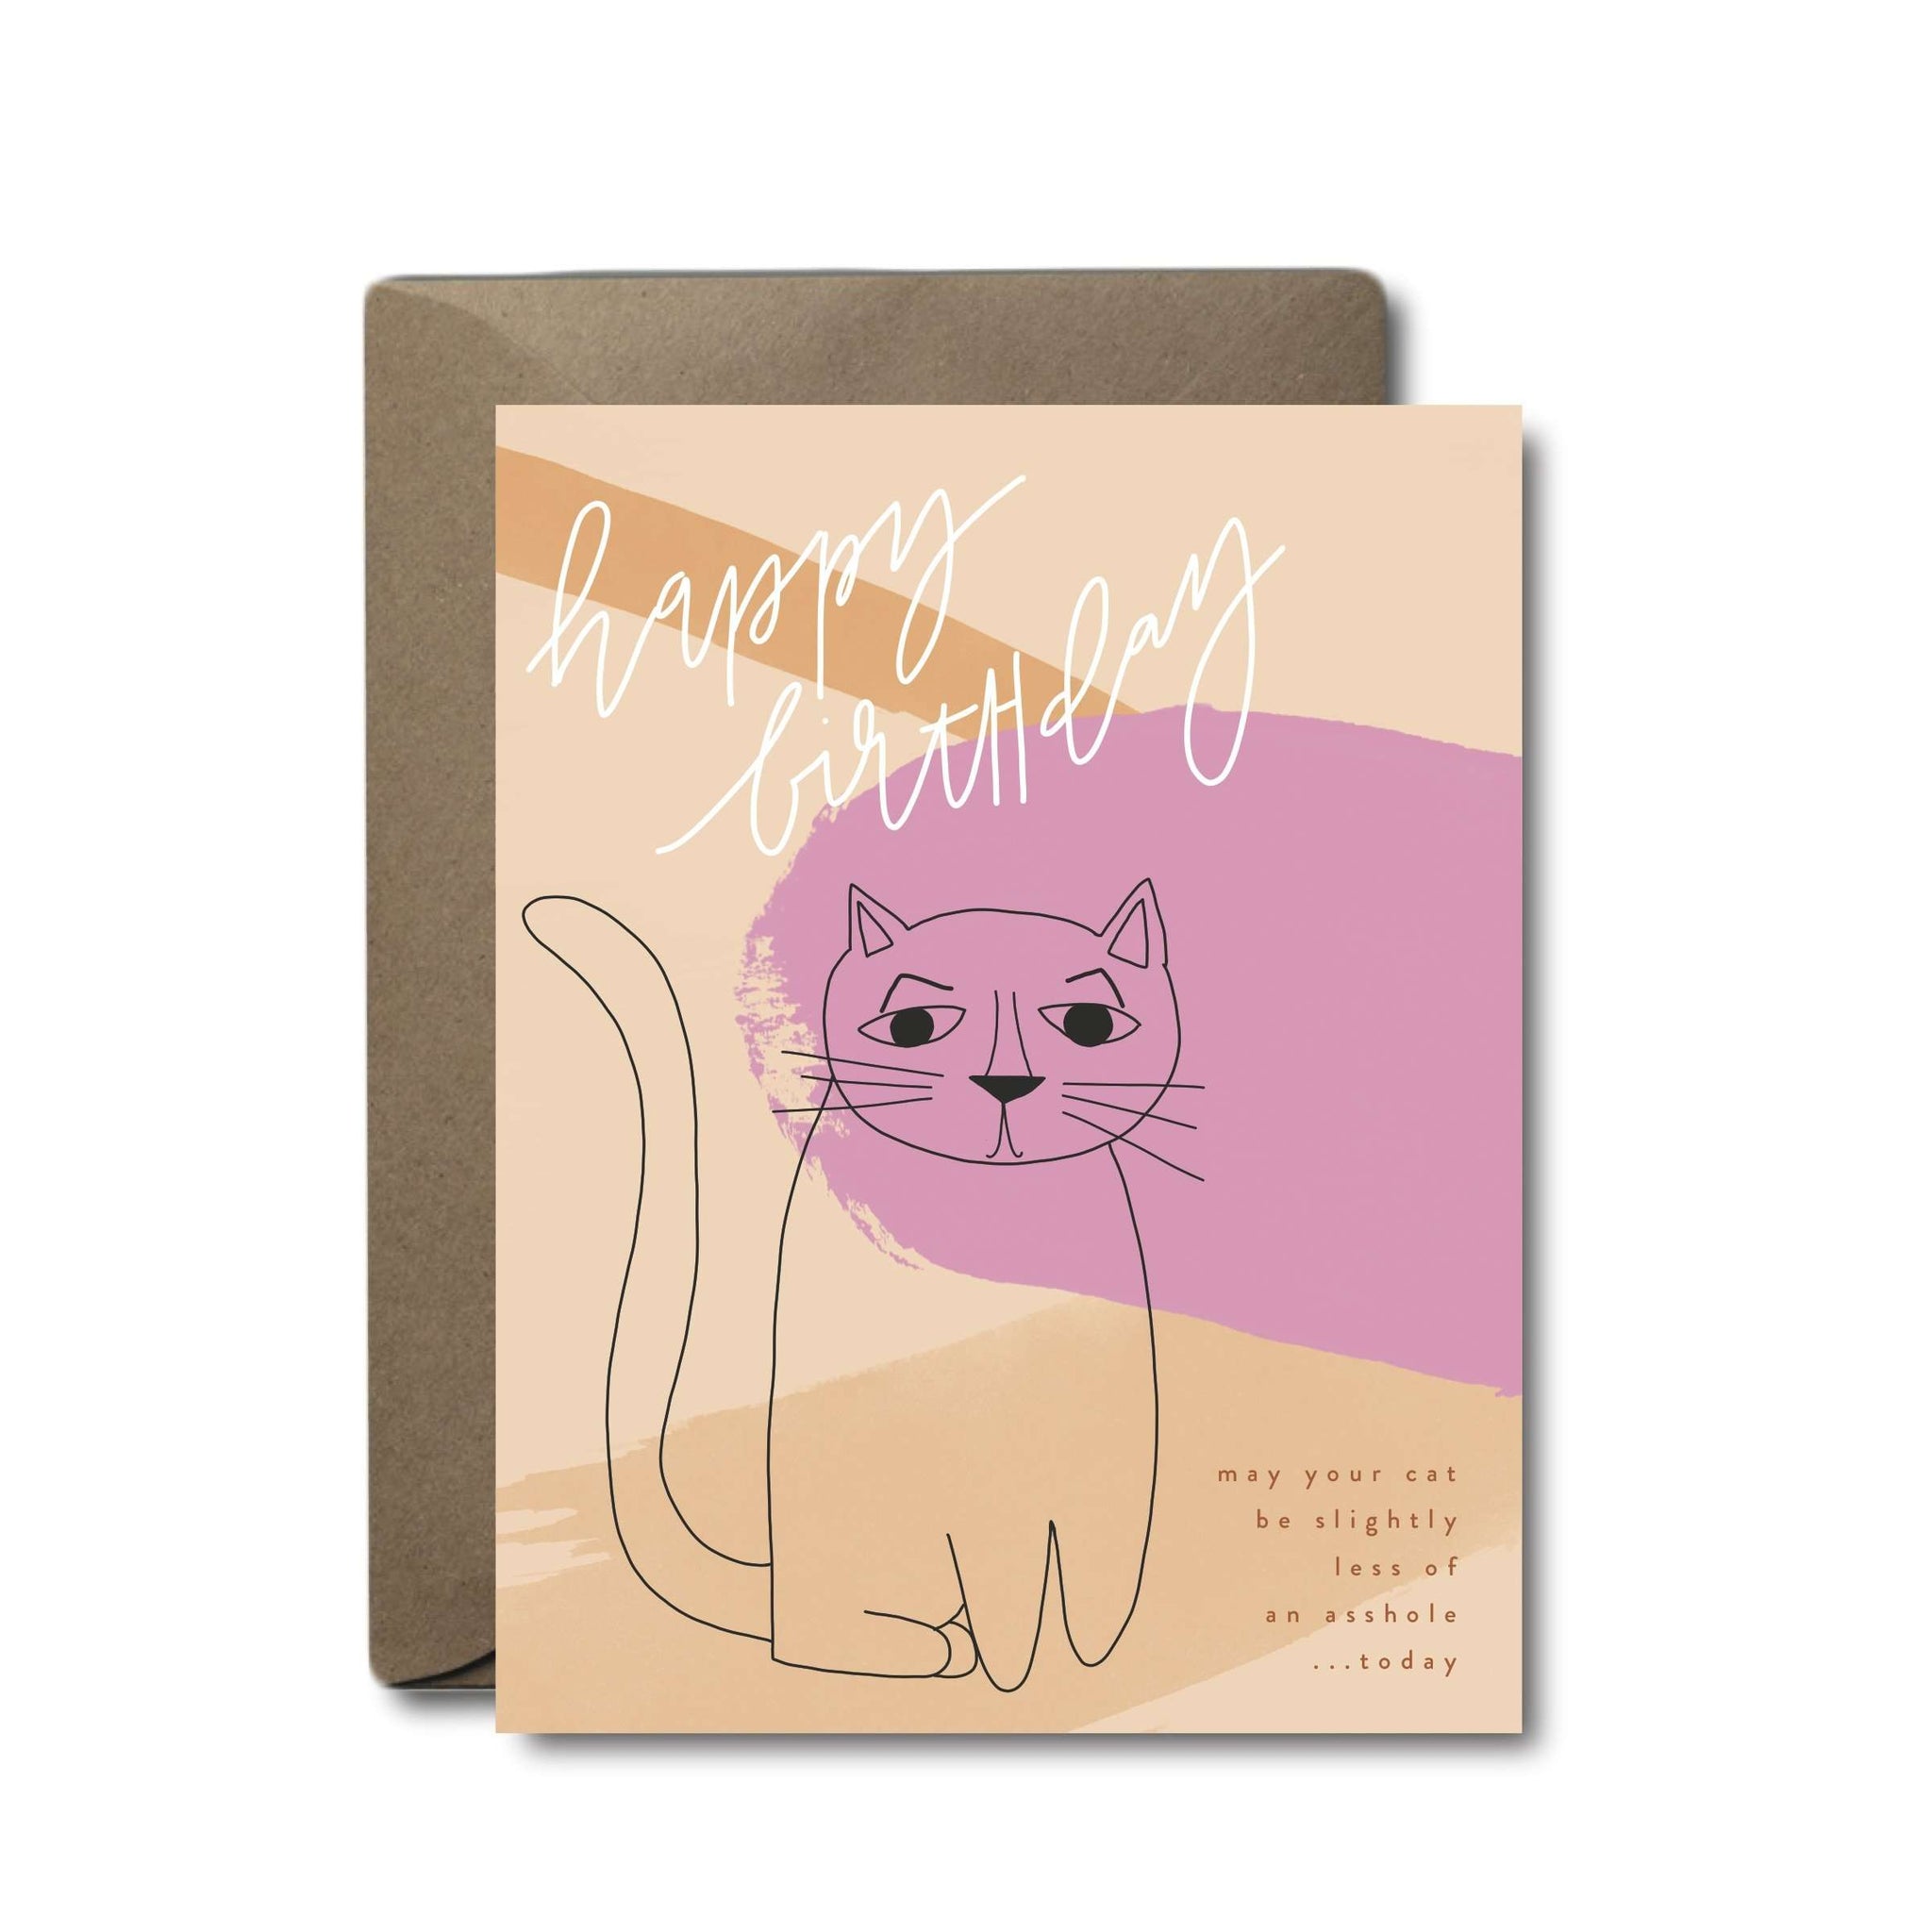 Asshole Cat Birthday Greeting Card | A2